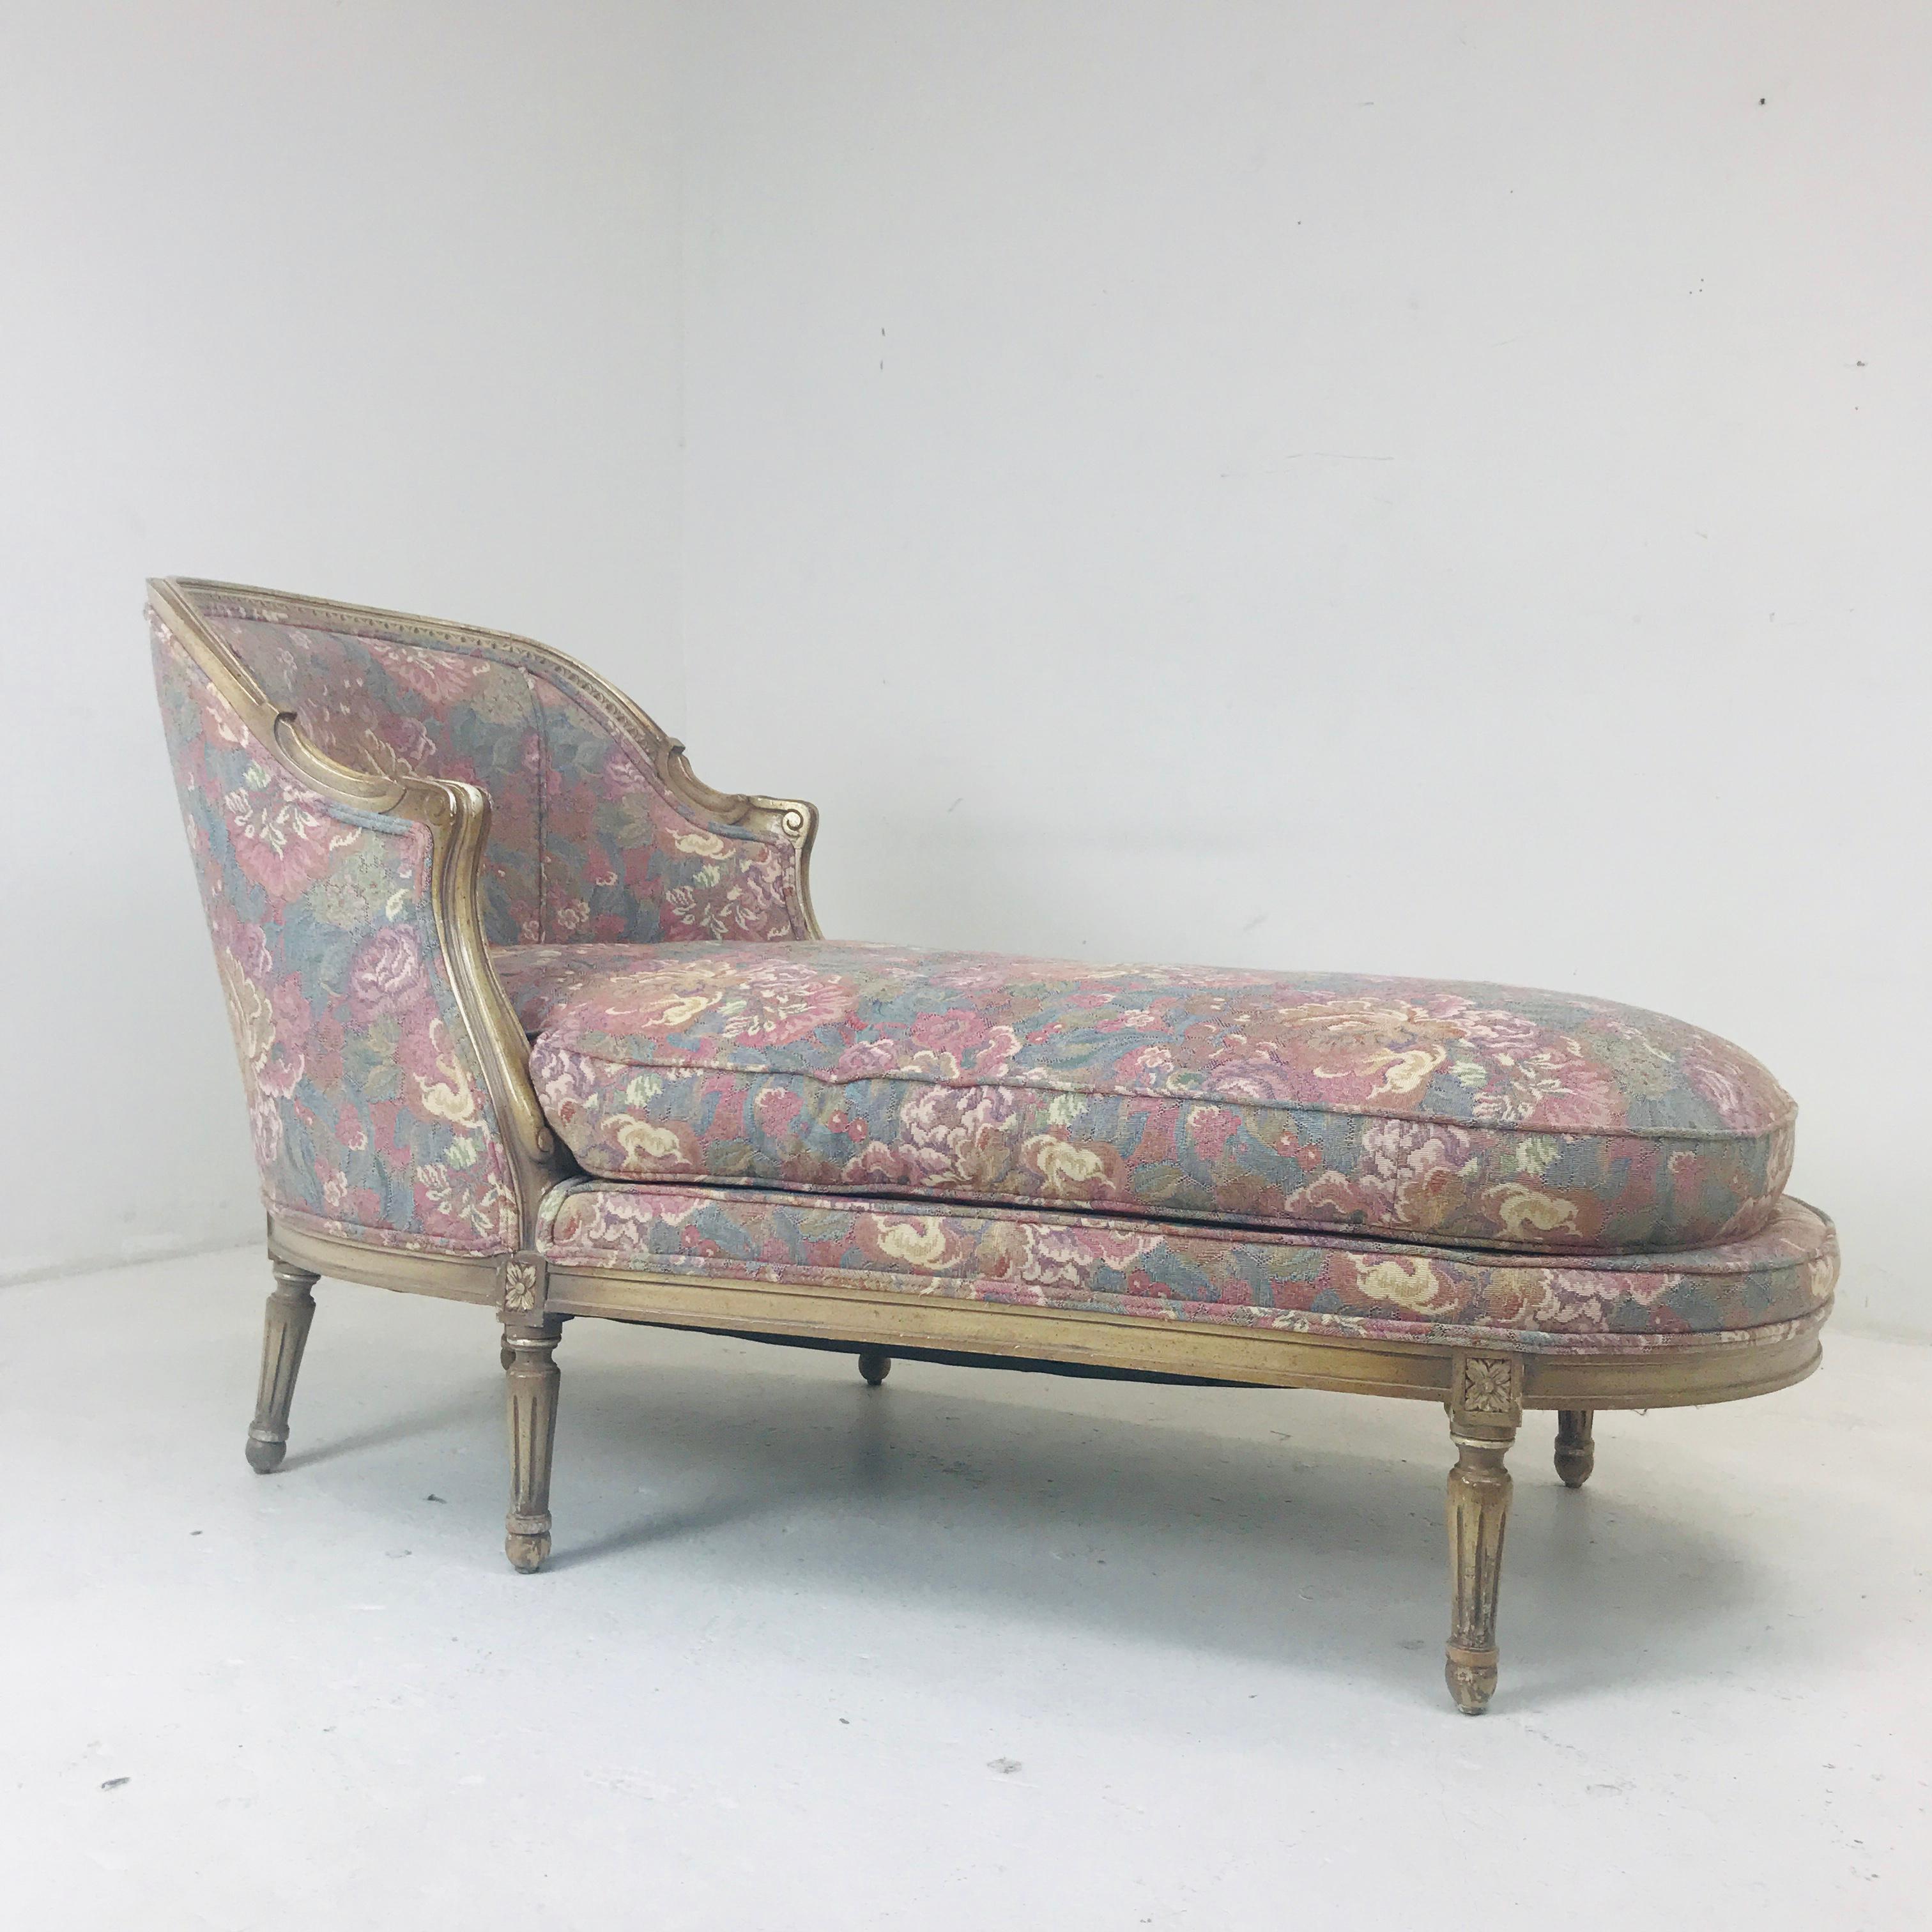 Chaise lounge/racamier/fainting sofa upholstered in a floral pale tone fabric.